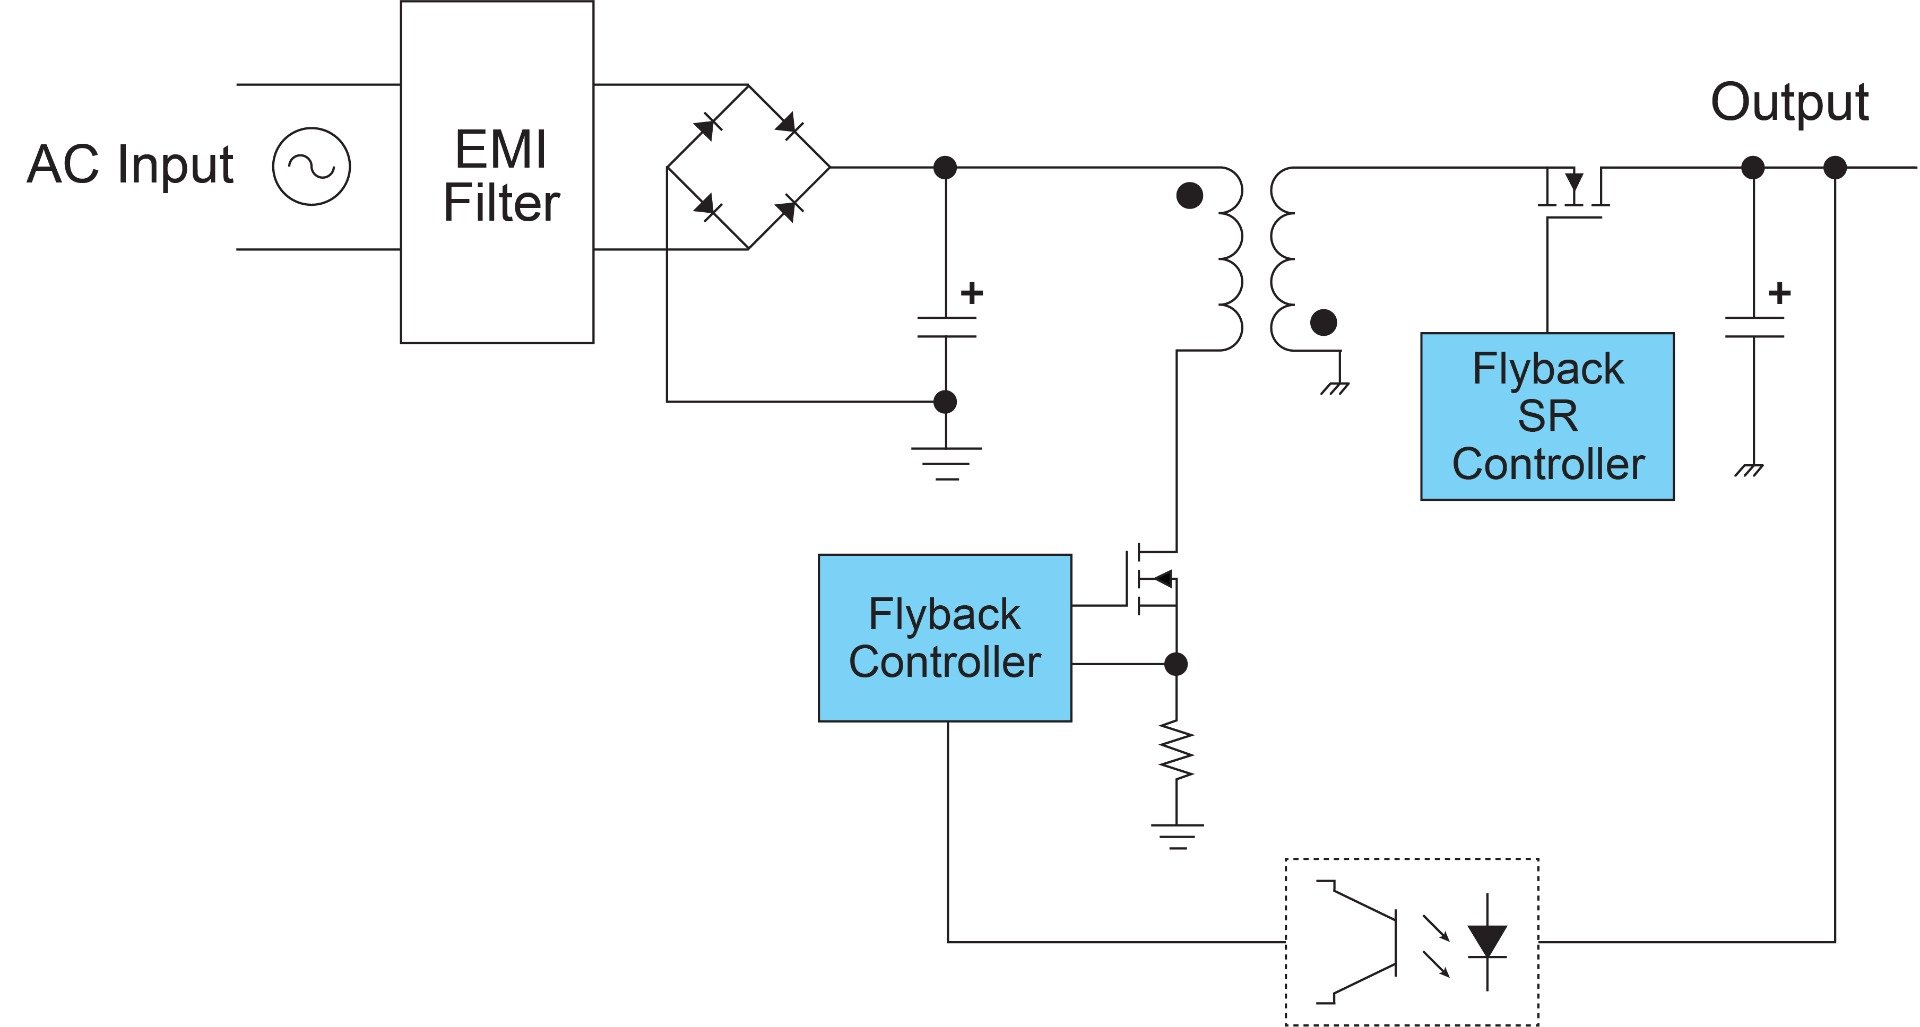 Figure_1_Typical_Block_Diagram_for_a_Flyback_Power_Supply_Used_in_Fast_Chargers.jpg